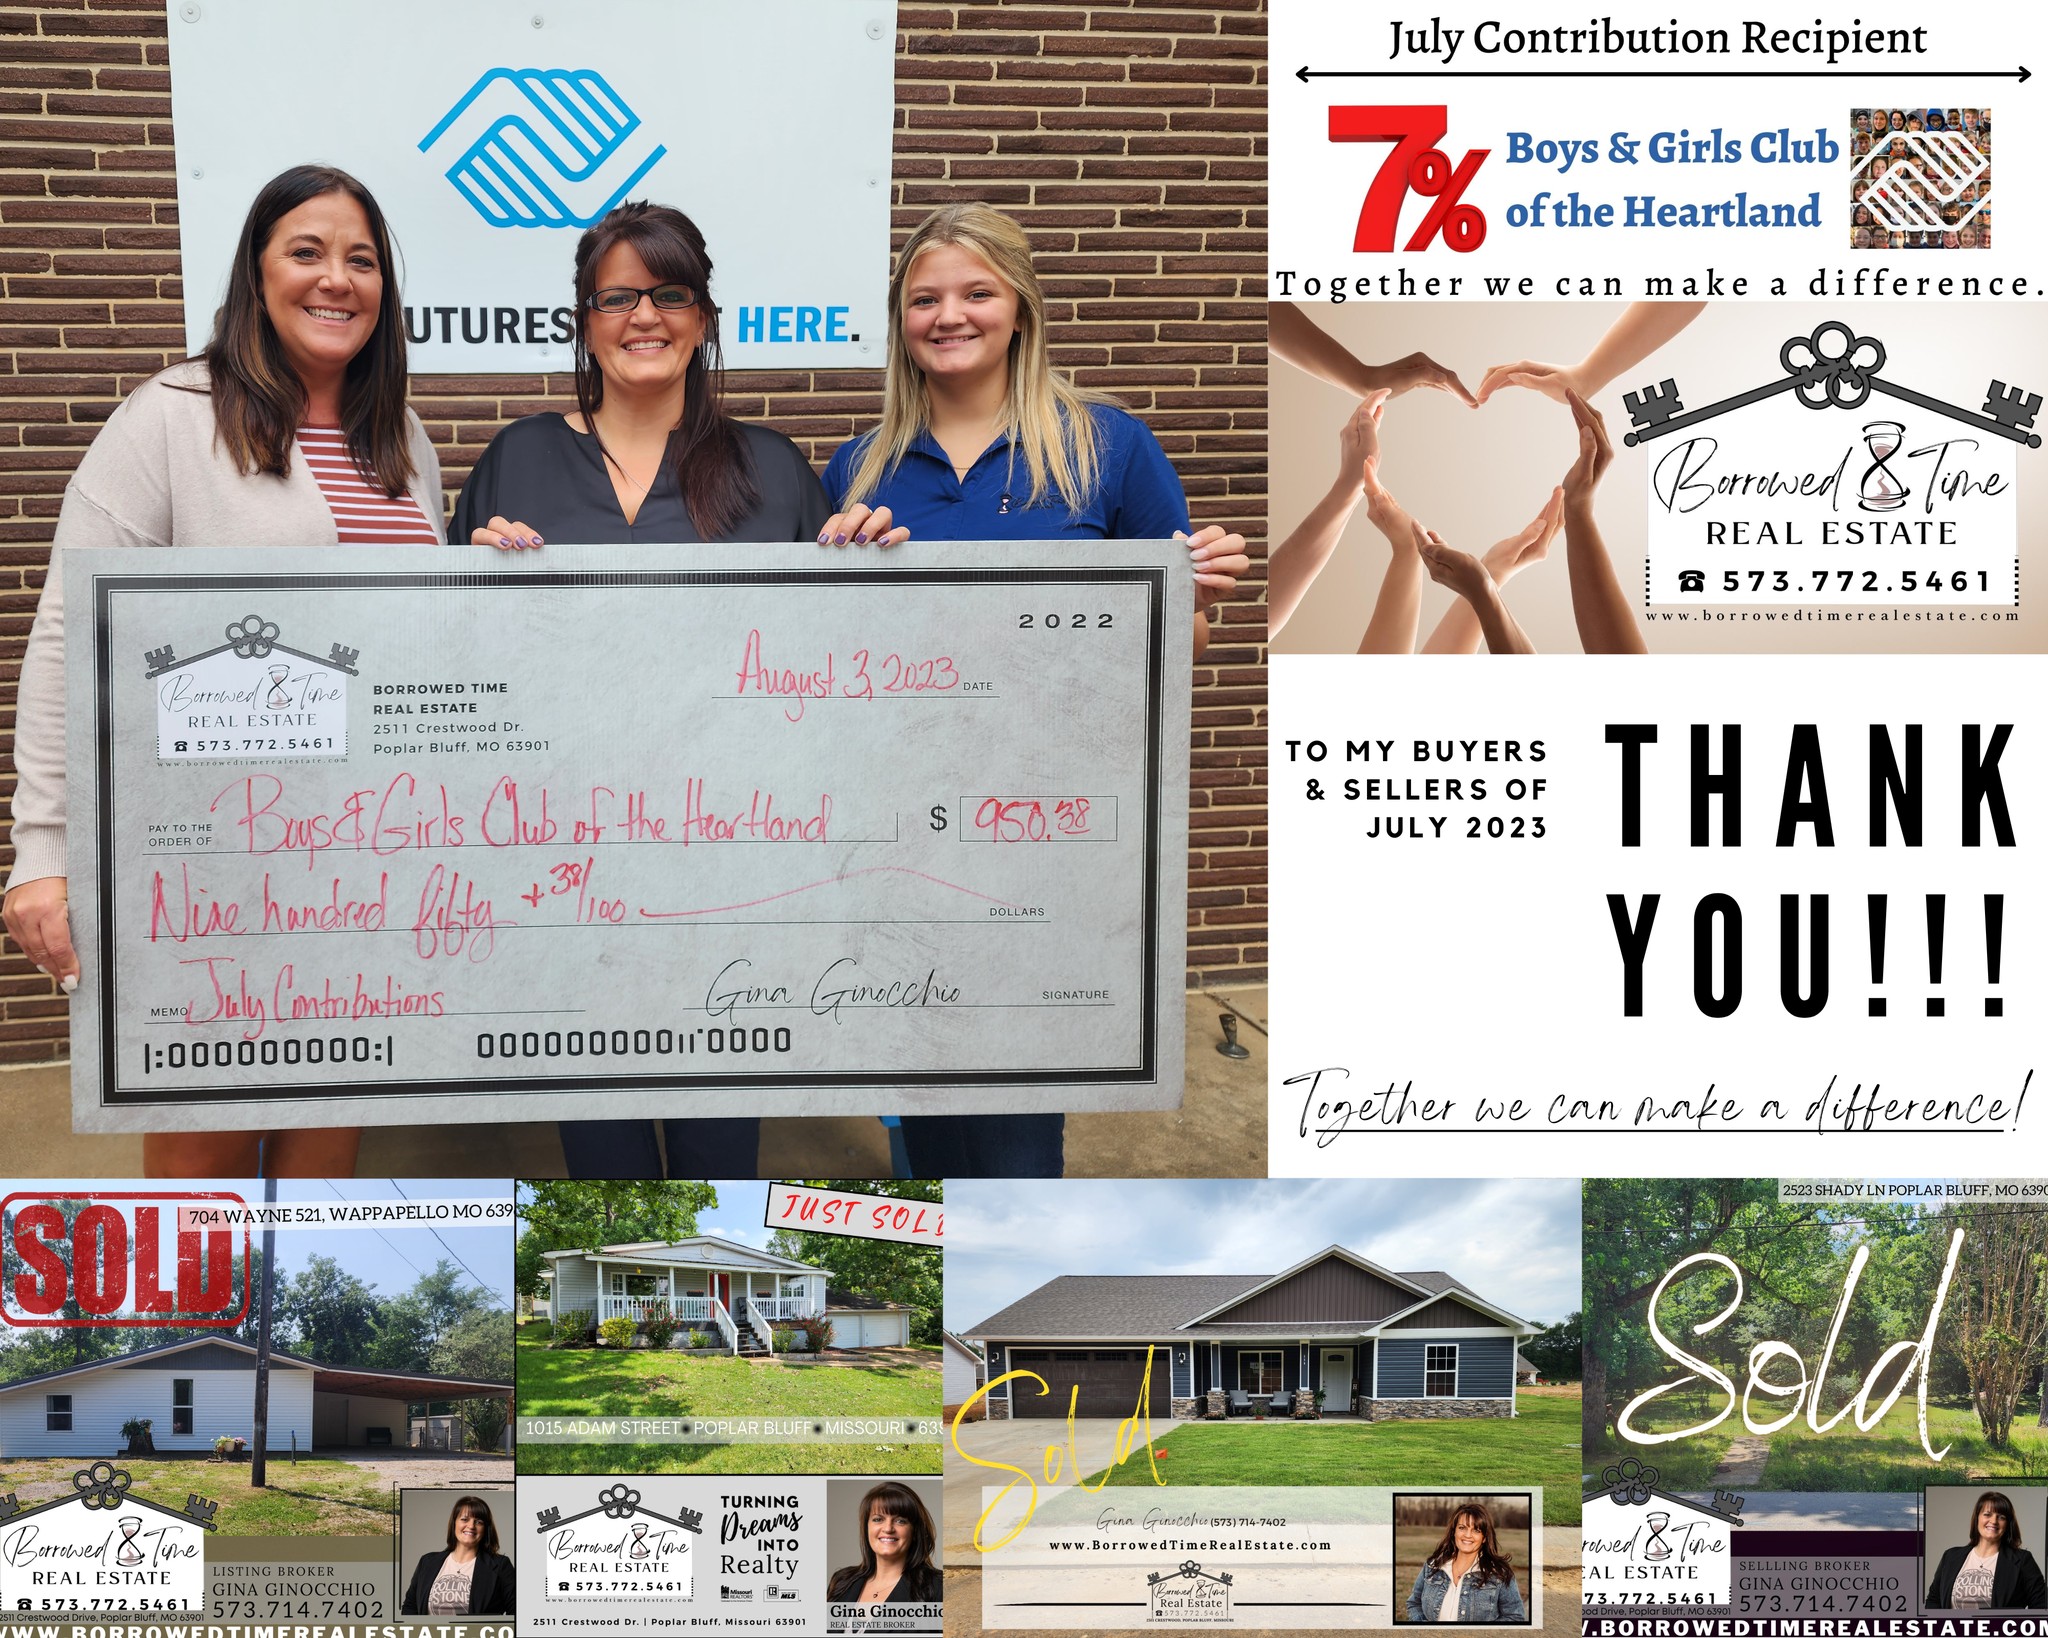 Gina Ginocchio and Hope Hunter presenting July's community contribution check to Terri Macke McCormick on behalf of the Boys & Girls Club of the Heartland.